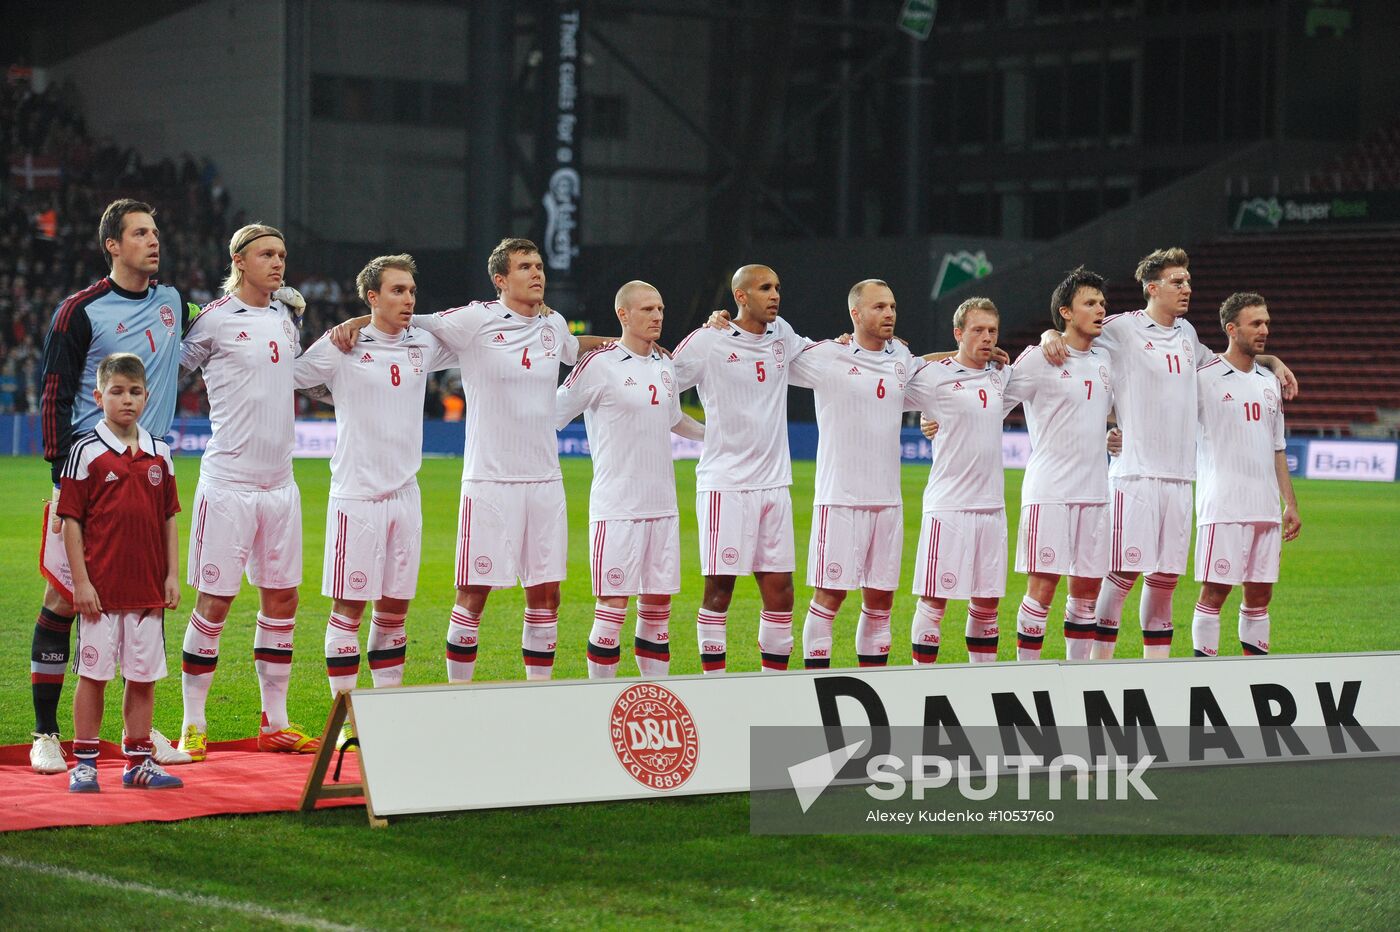 Football Friendly match between Denmark and Russia